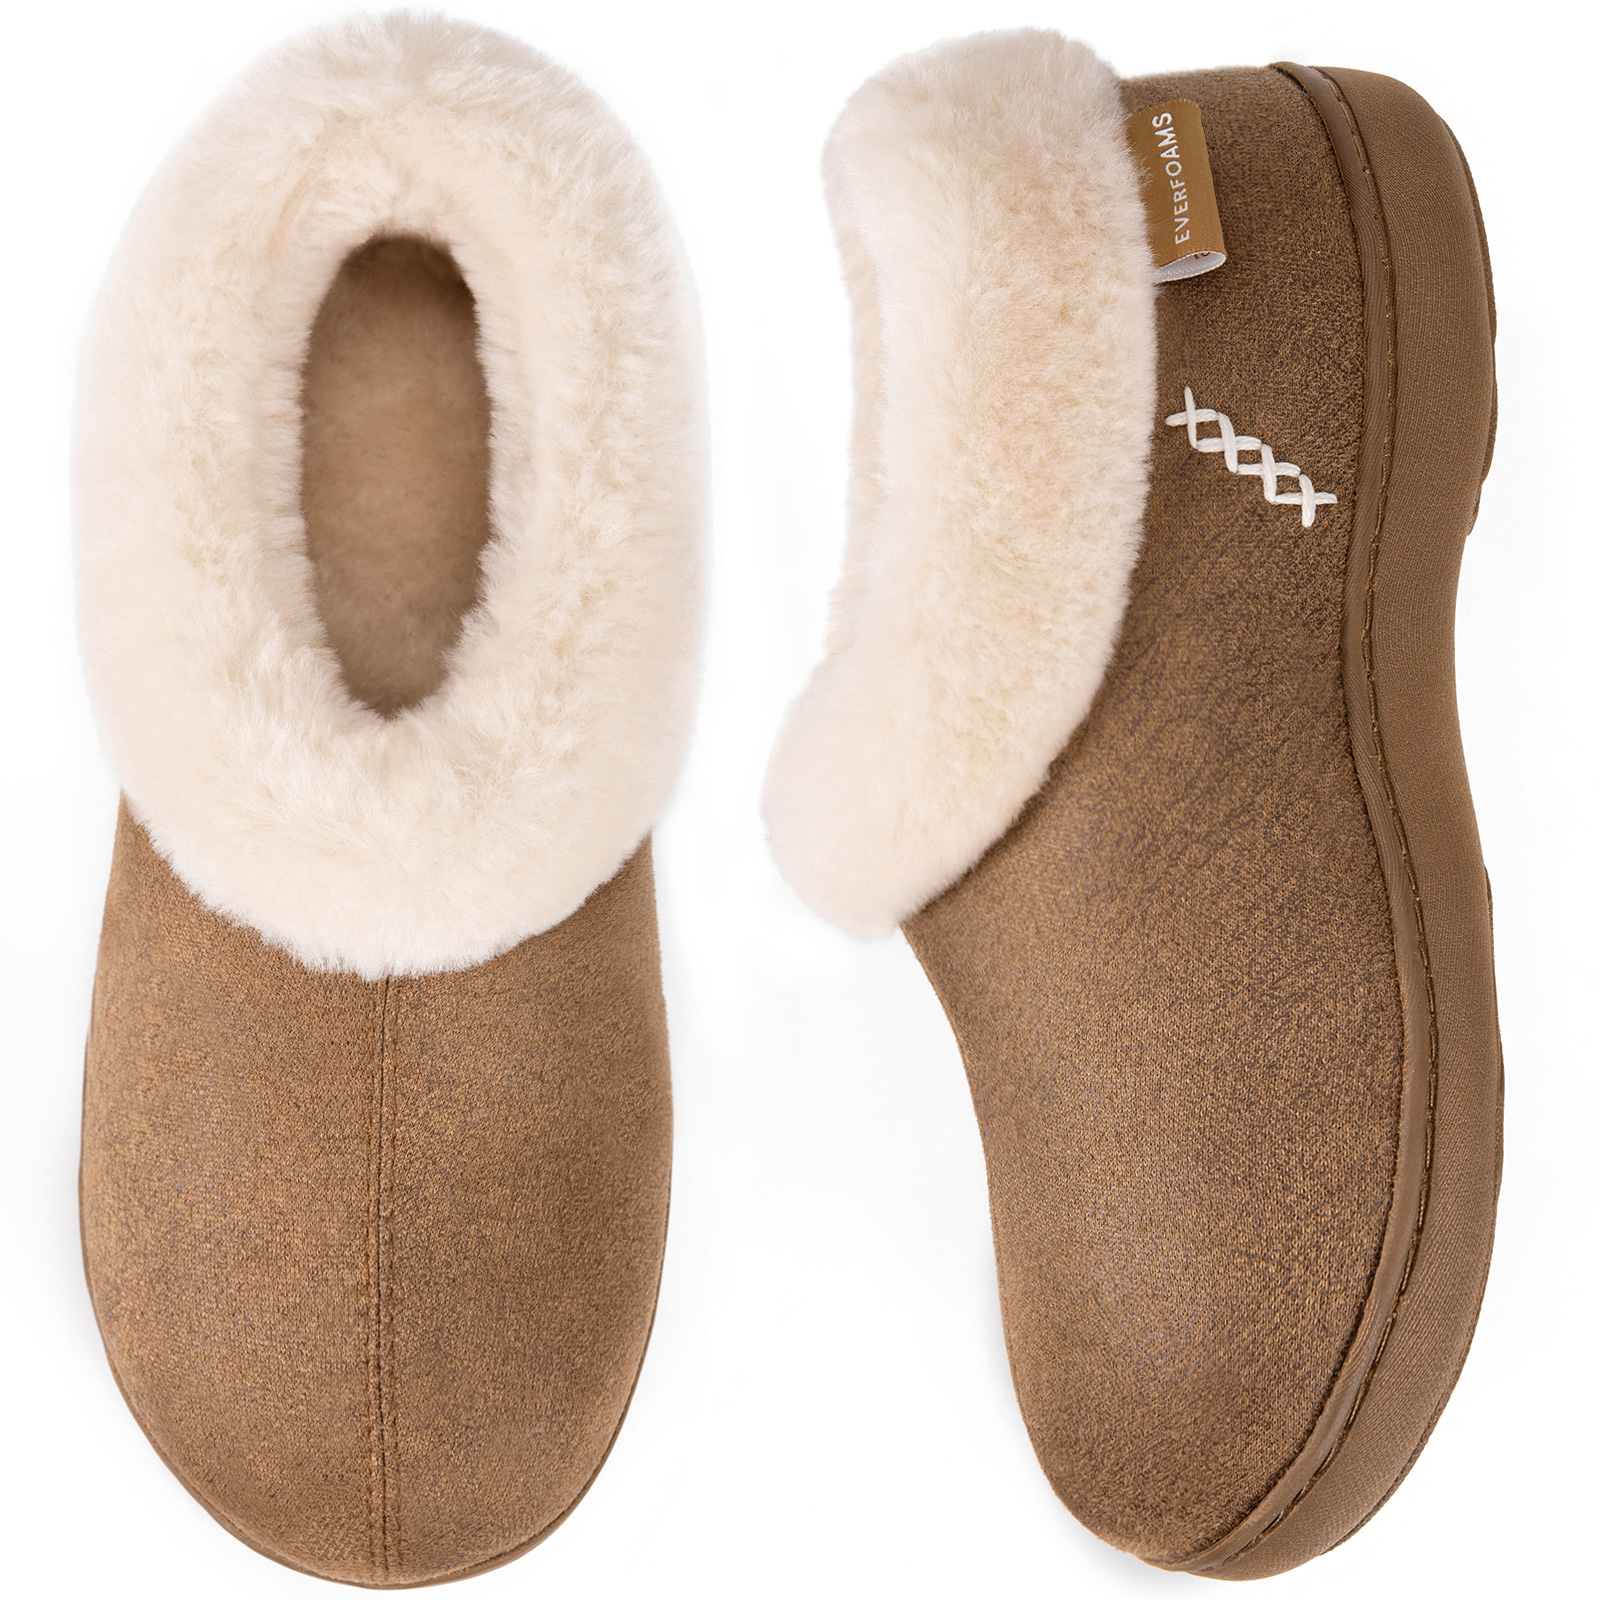 EverFoams Women's Micro Suede Cozy Memory Foam Winter Slippers with Fuzzy Faux Fur Collar and Indoor Outdoor Rubber Sole - image 1 of 6